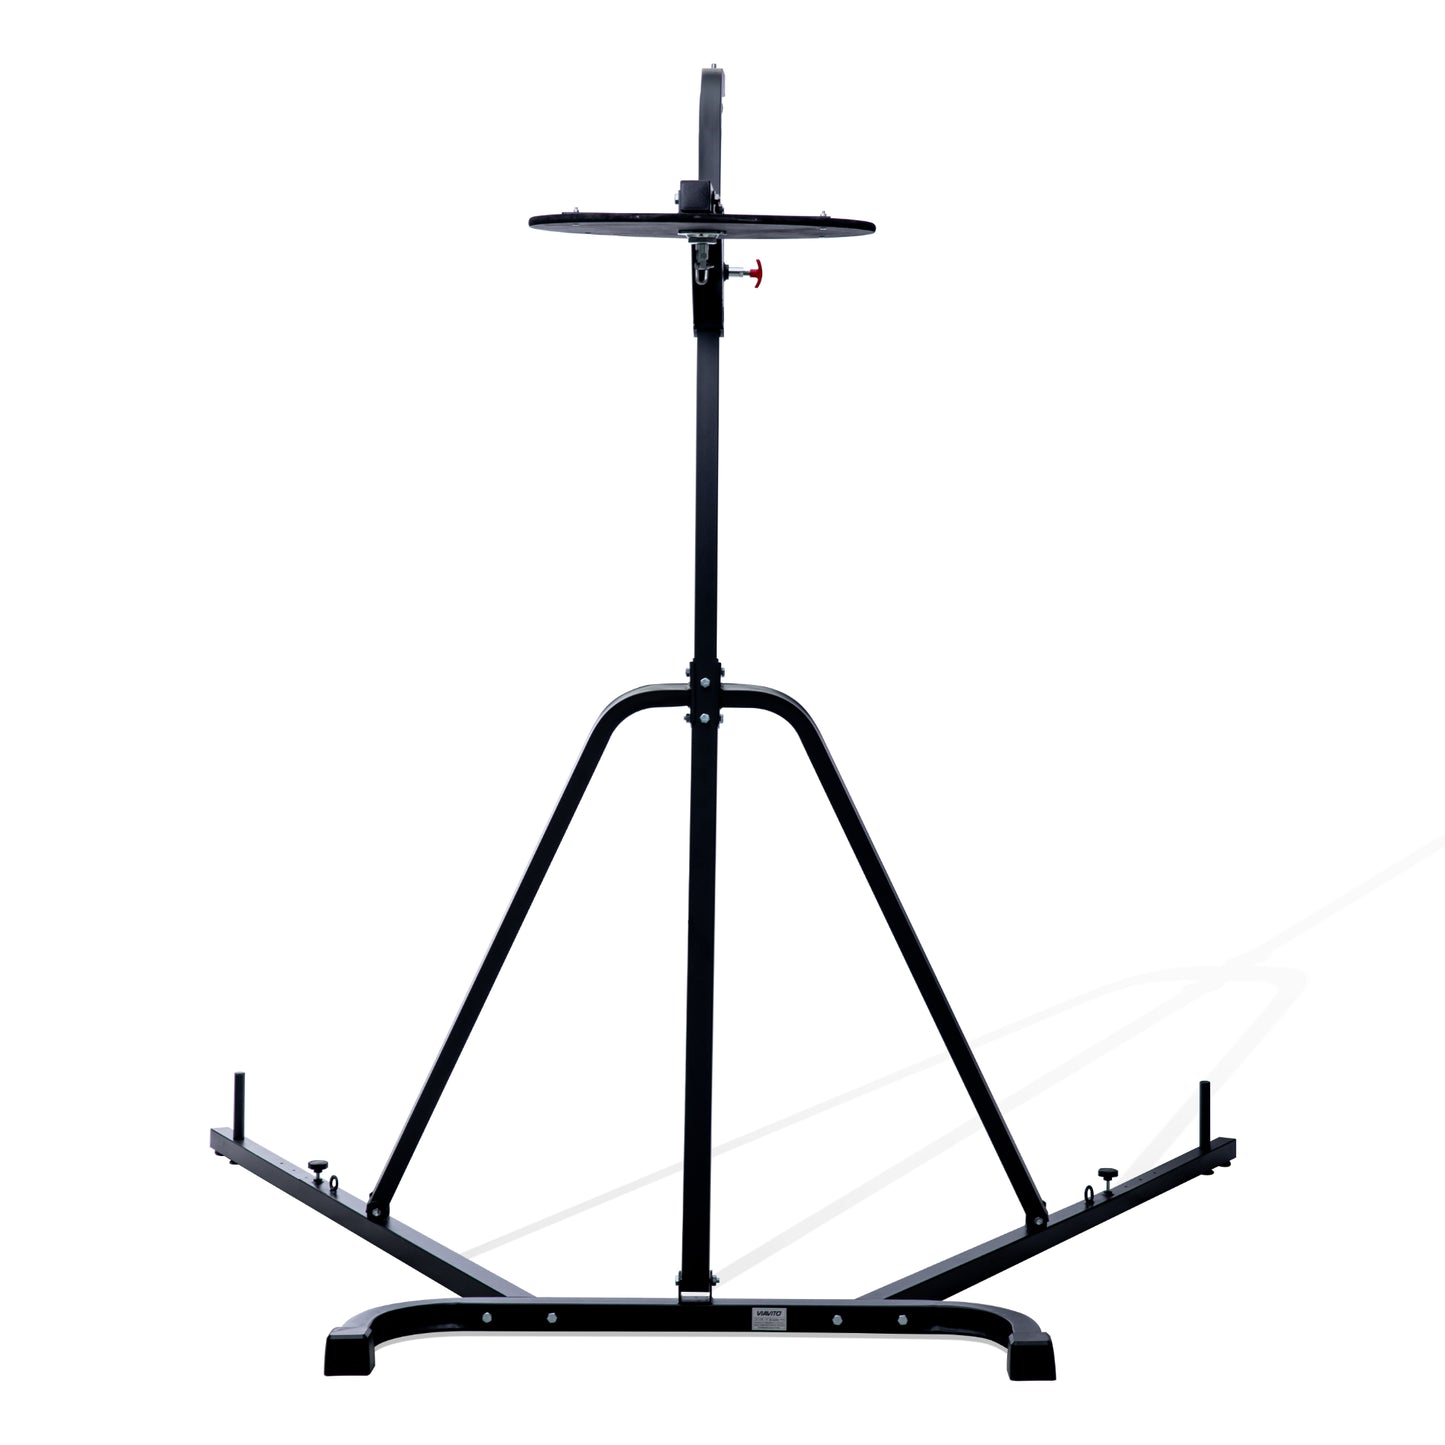 |Viavito HDB1000 Heavy Duty Boxing Stand - front updated|